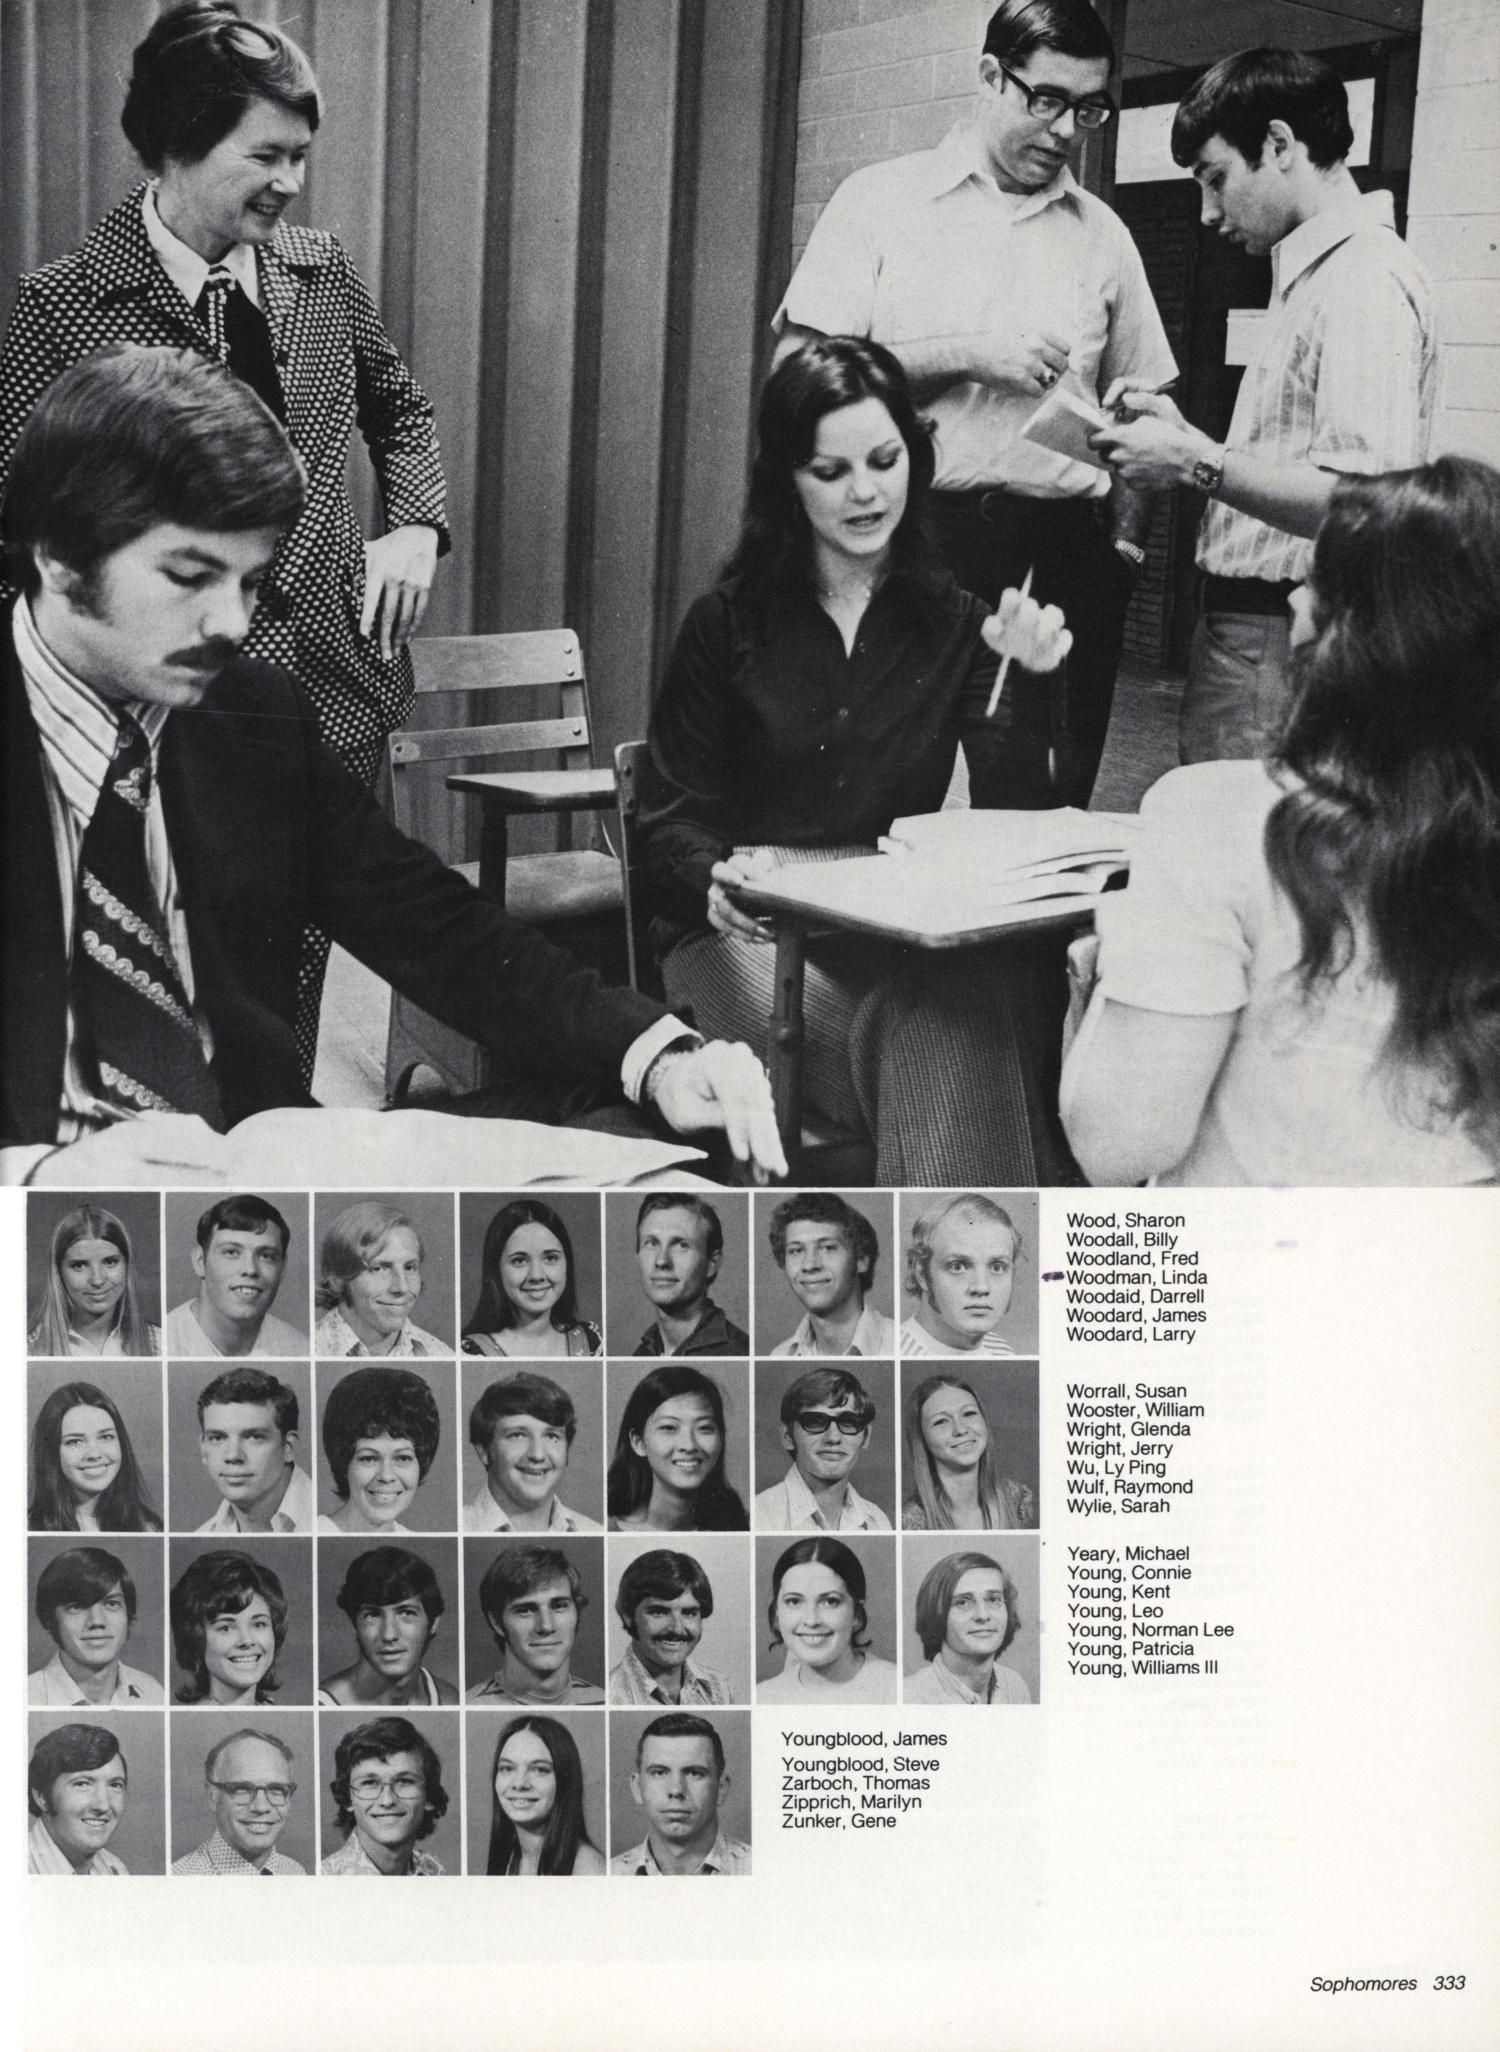 The Cardinal Yearbook Of Lamar University 1973 Page 333 The Portal To Texas History 7316